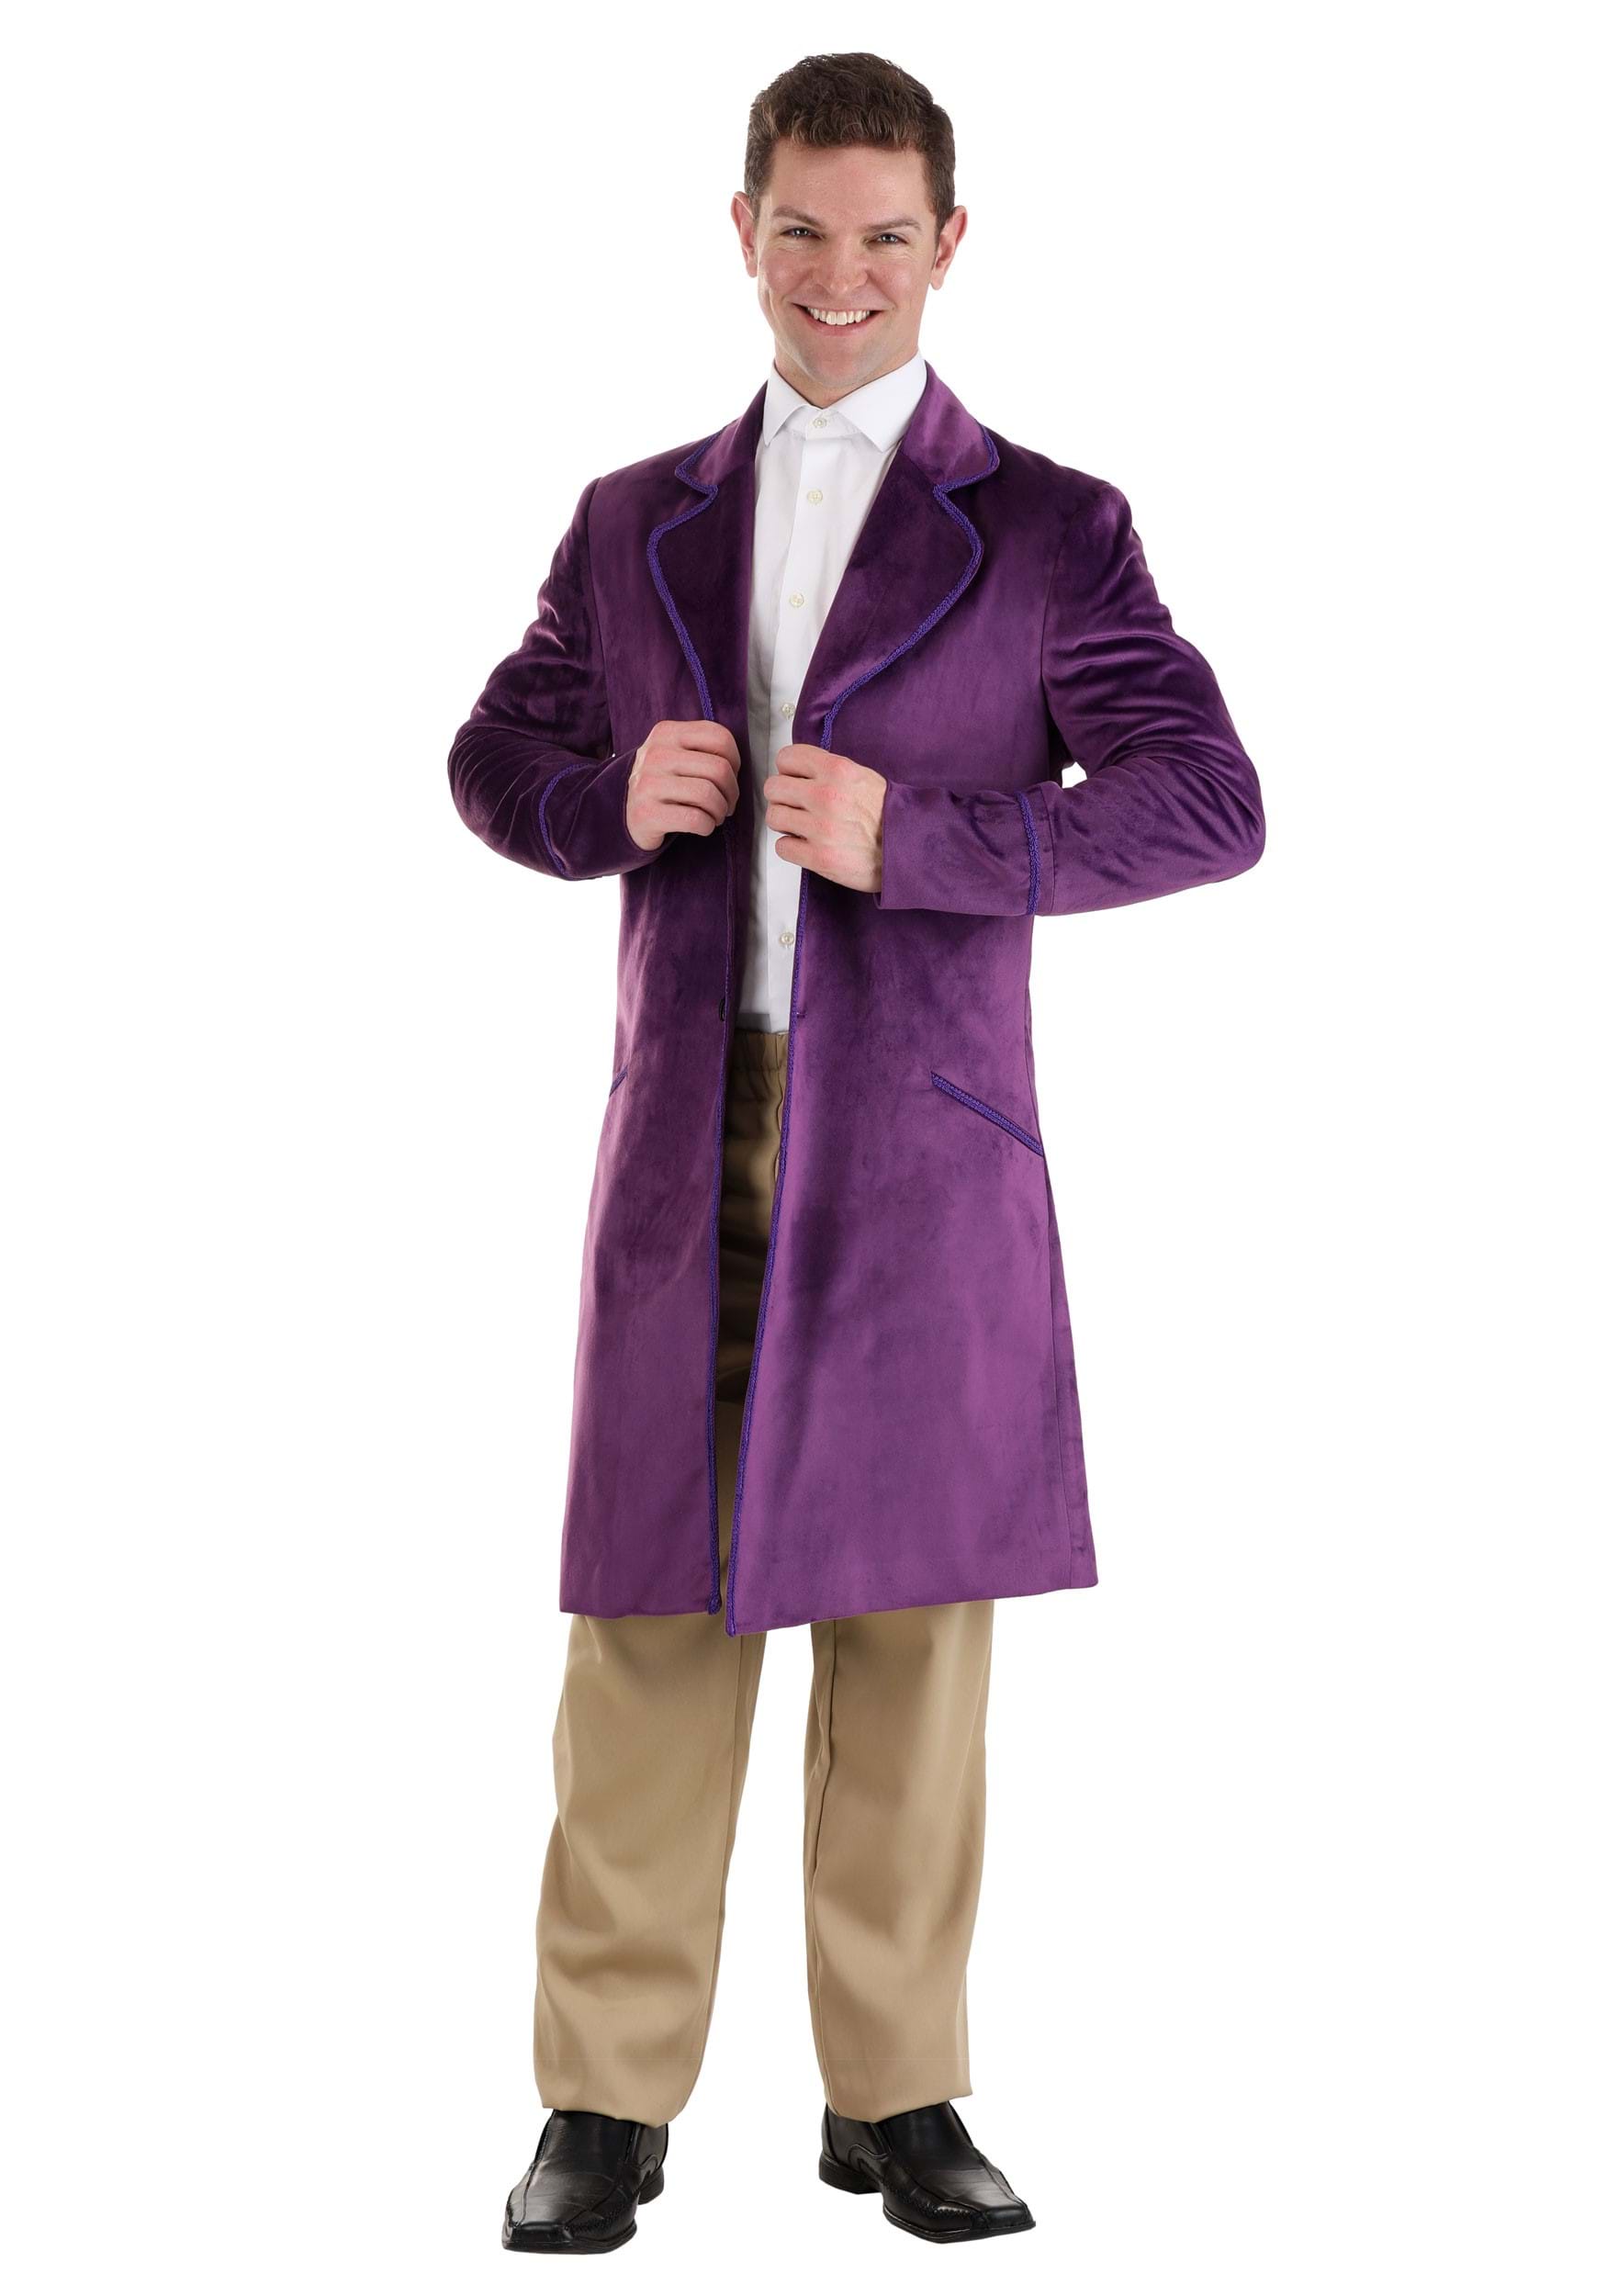 Authentic Willy Wonka Costume Jacket For Men , Willy Wonka Costumes